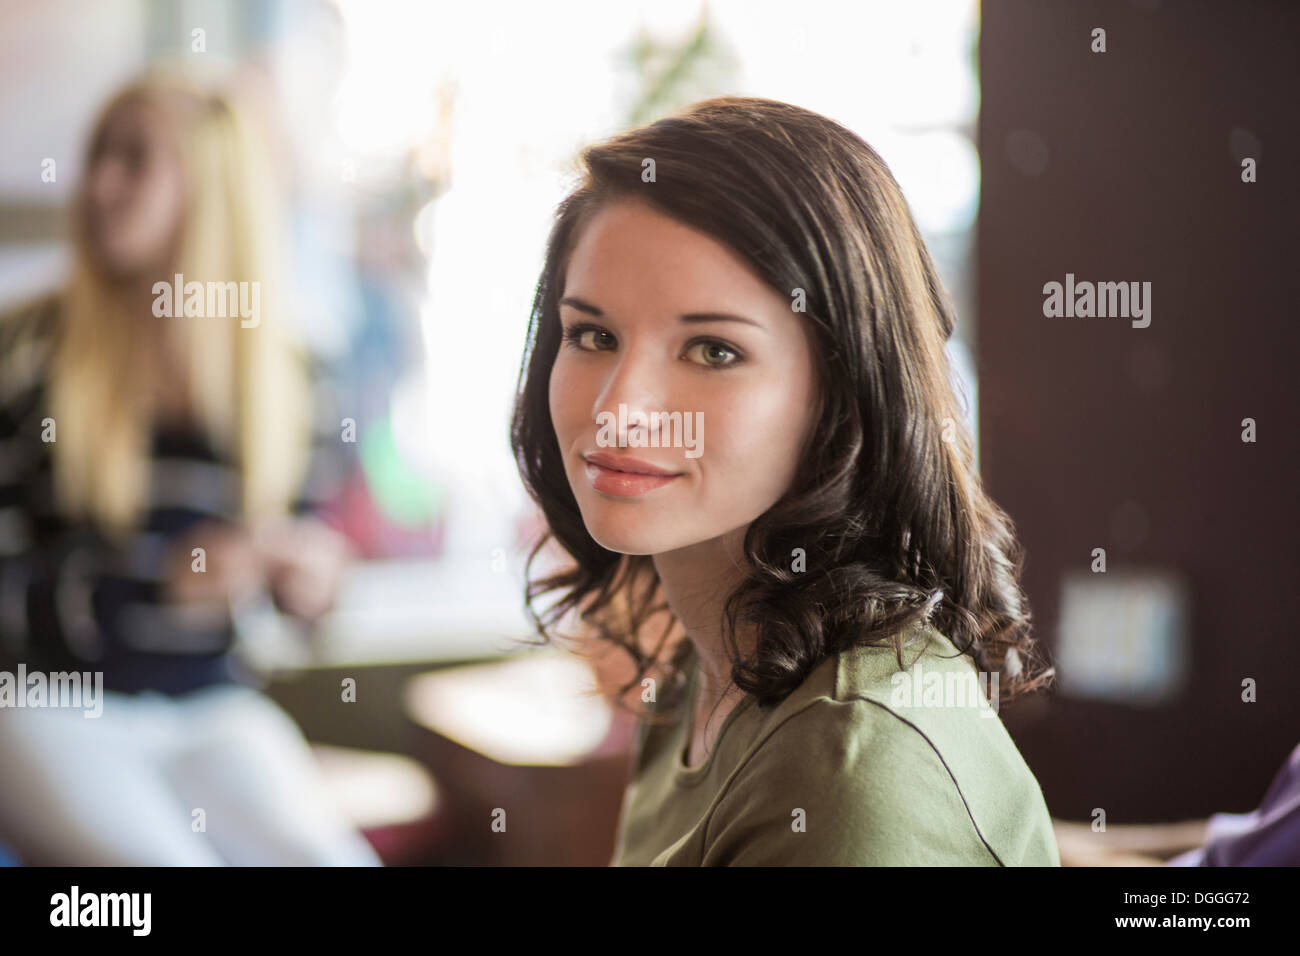 Portrait of teenager in cafe Stock Photo